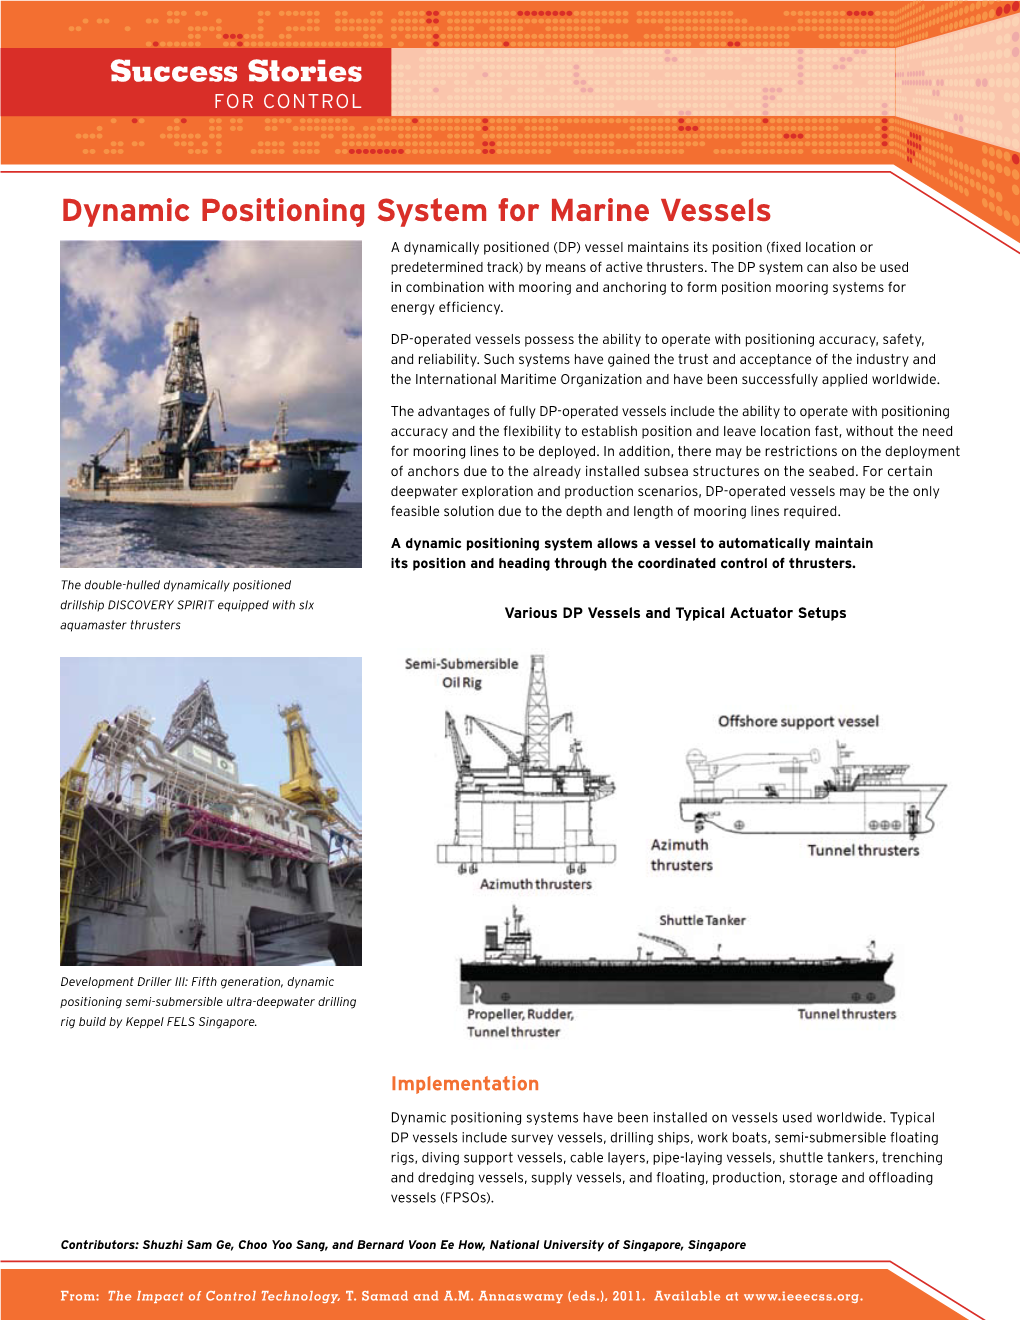 Dynamic Positioning System for Marine Vessels